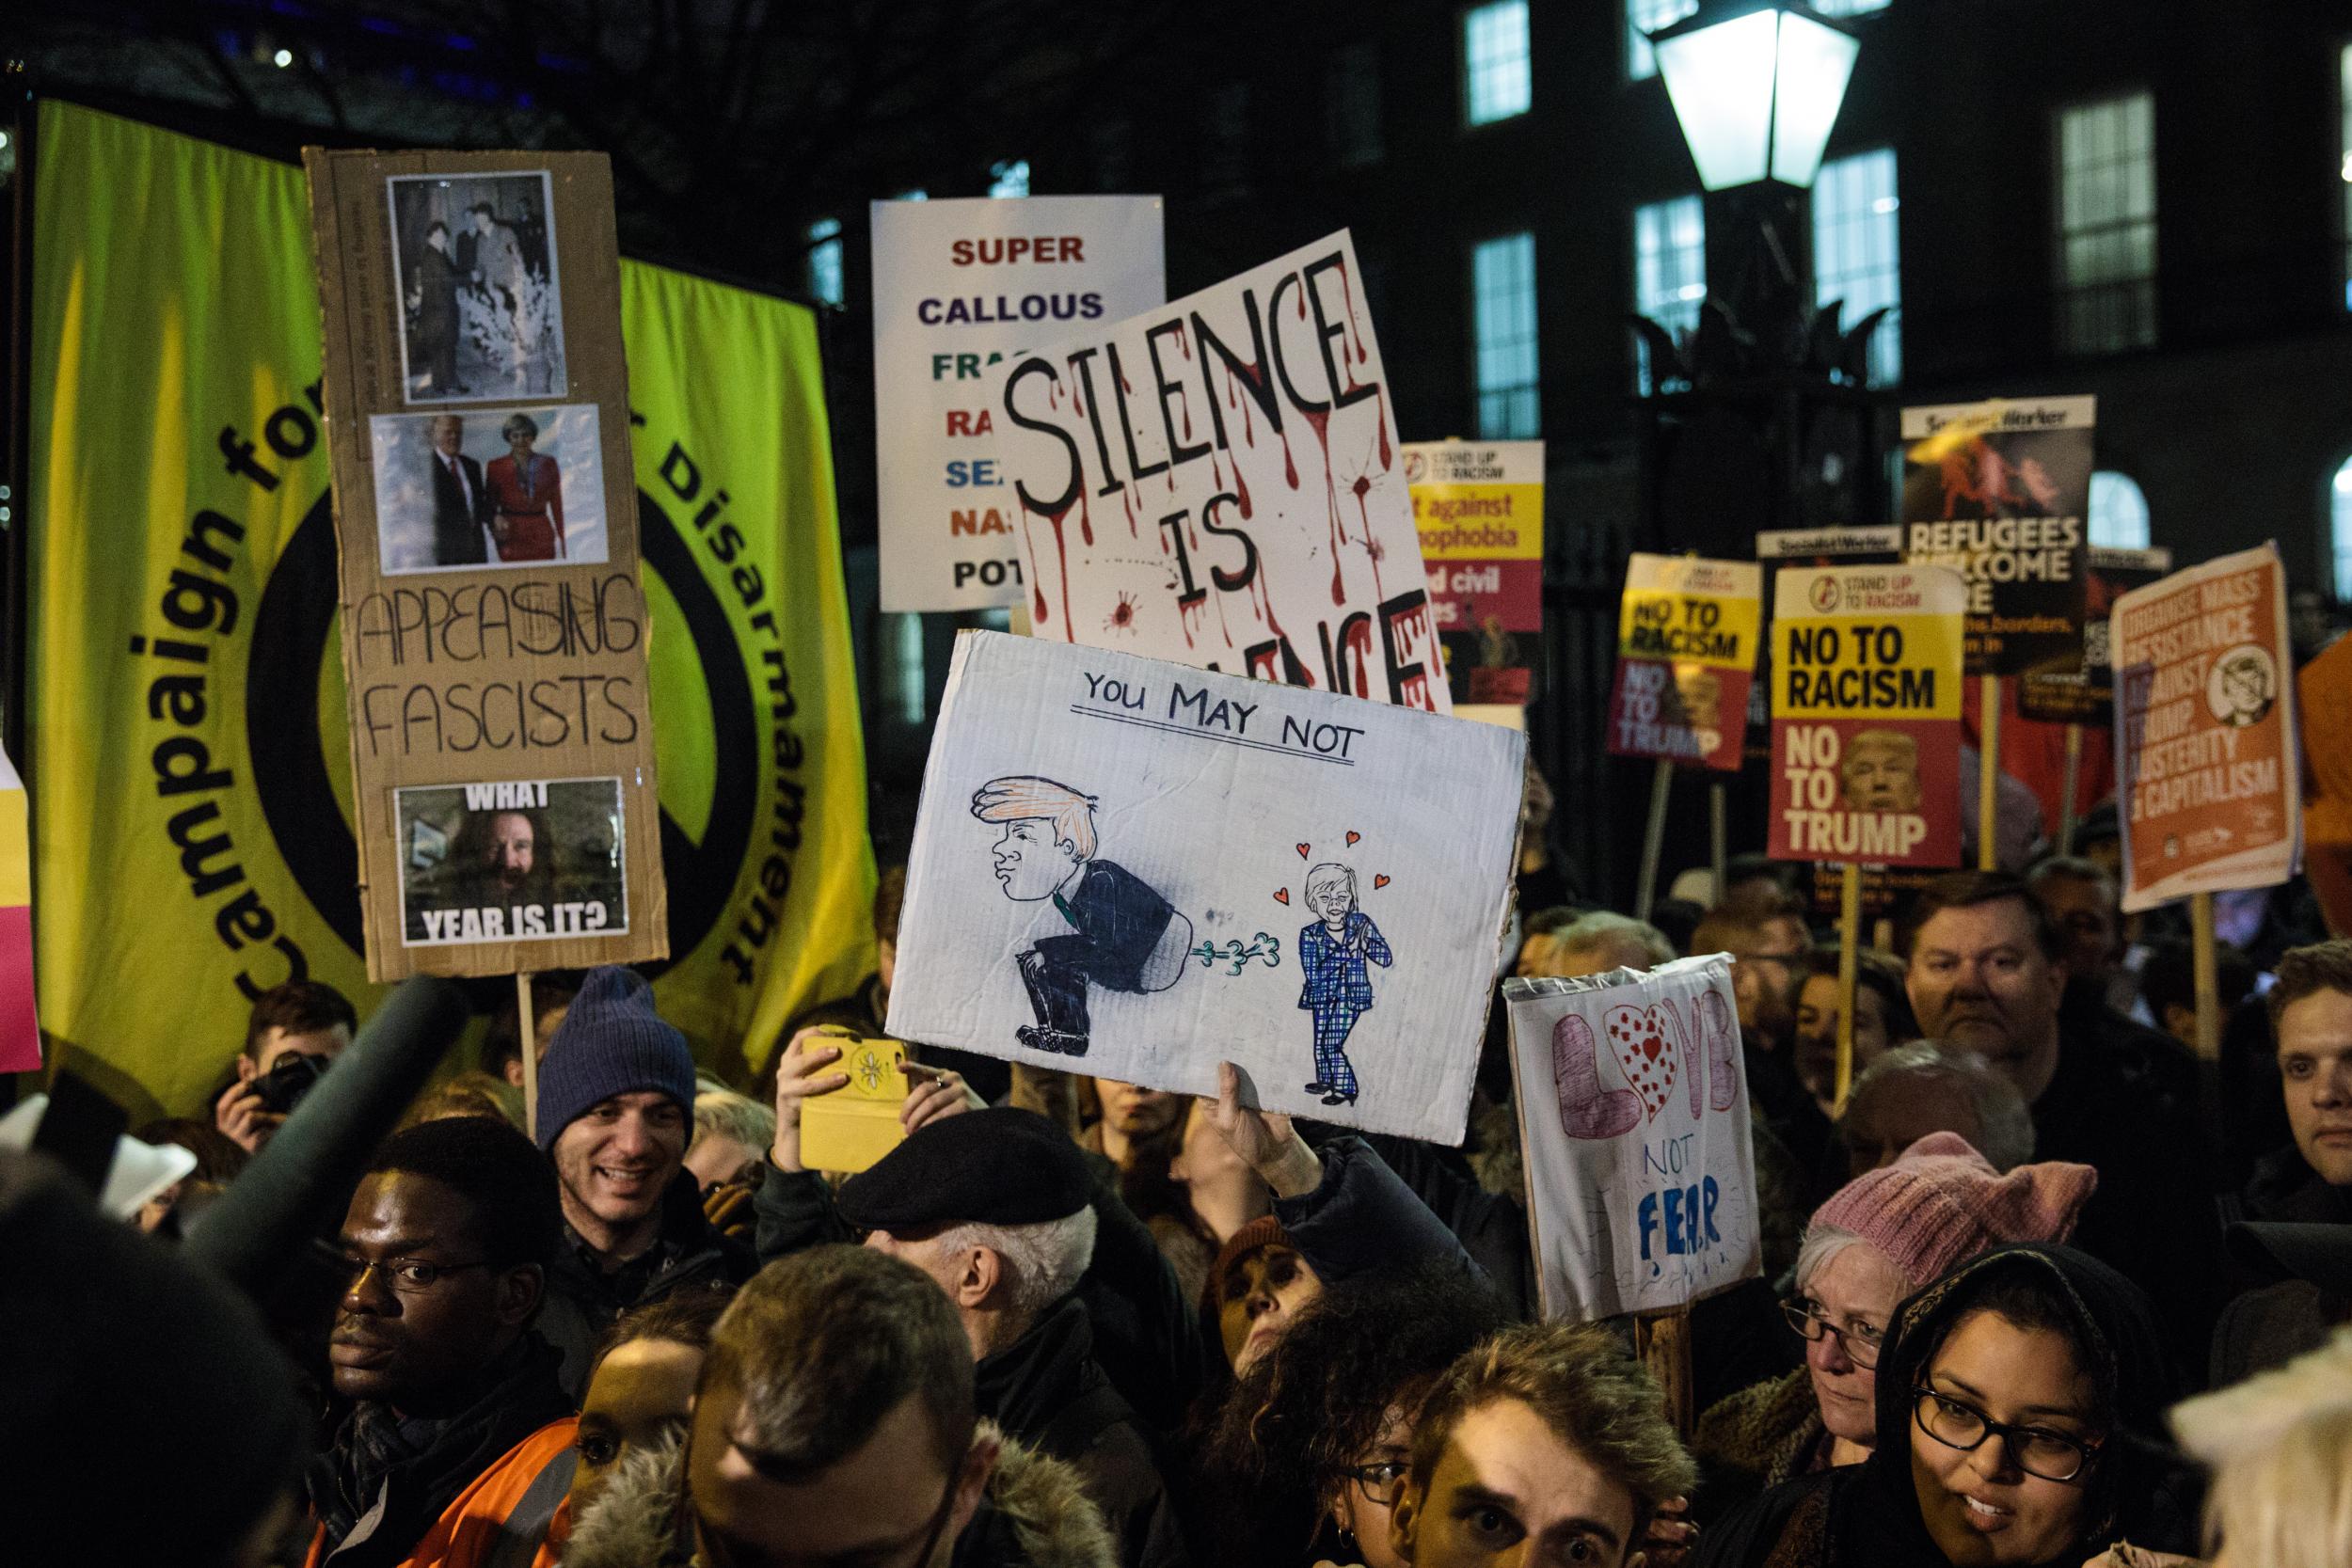 Protesters outside Downing Street, London, 30 January 2017